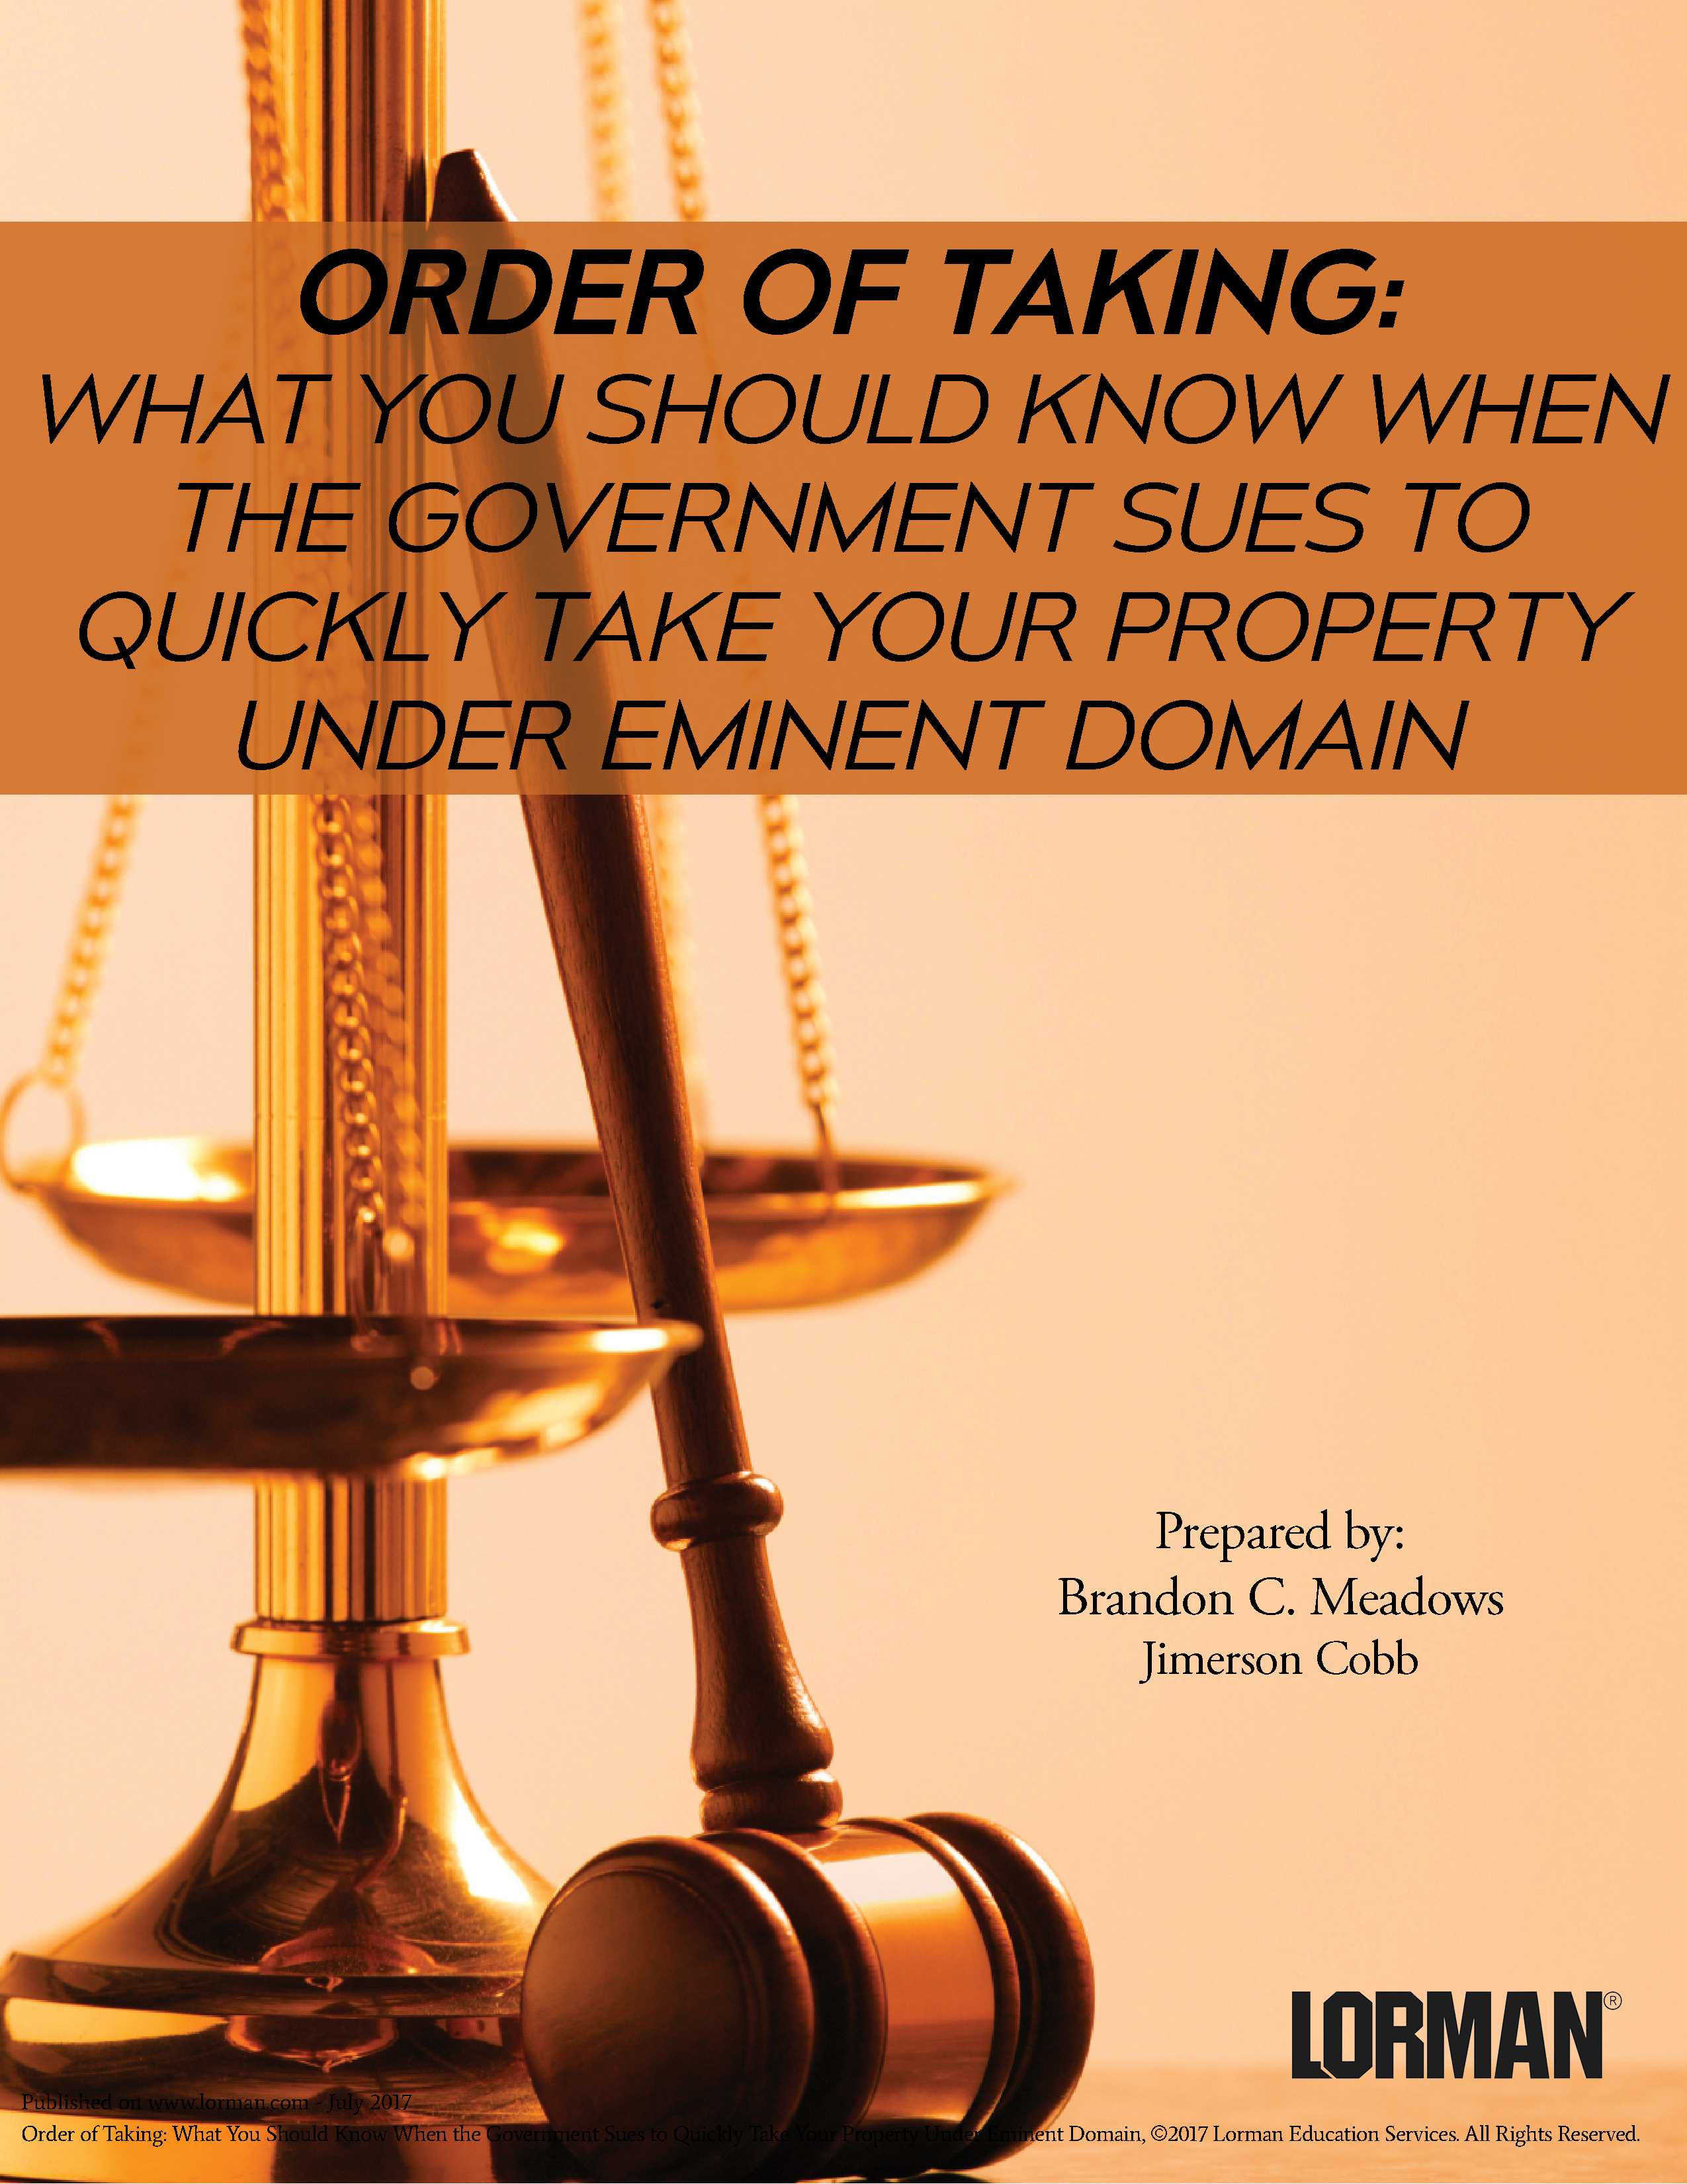 What You Should Know When the Government Sues to Quickly Take Your Property Under Eminent Domain